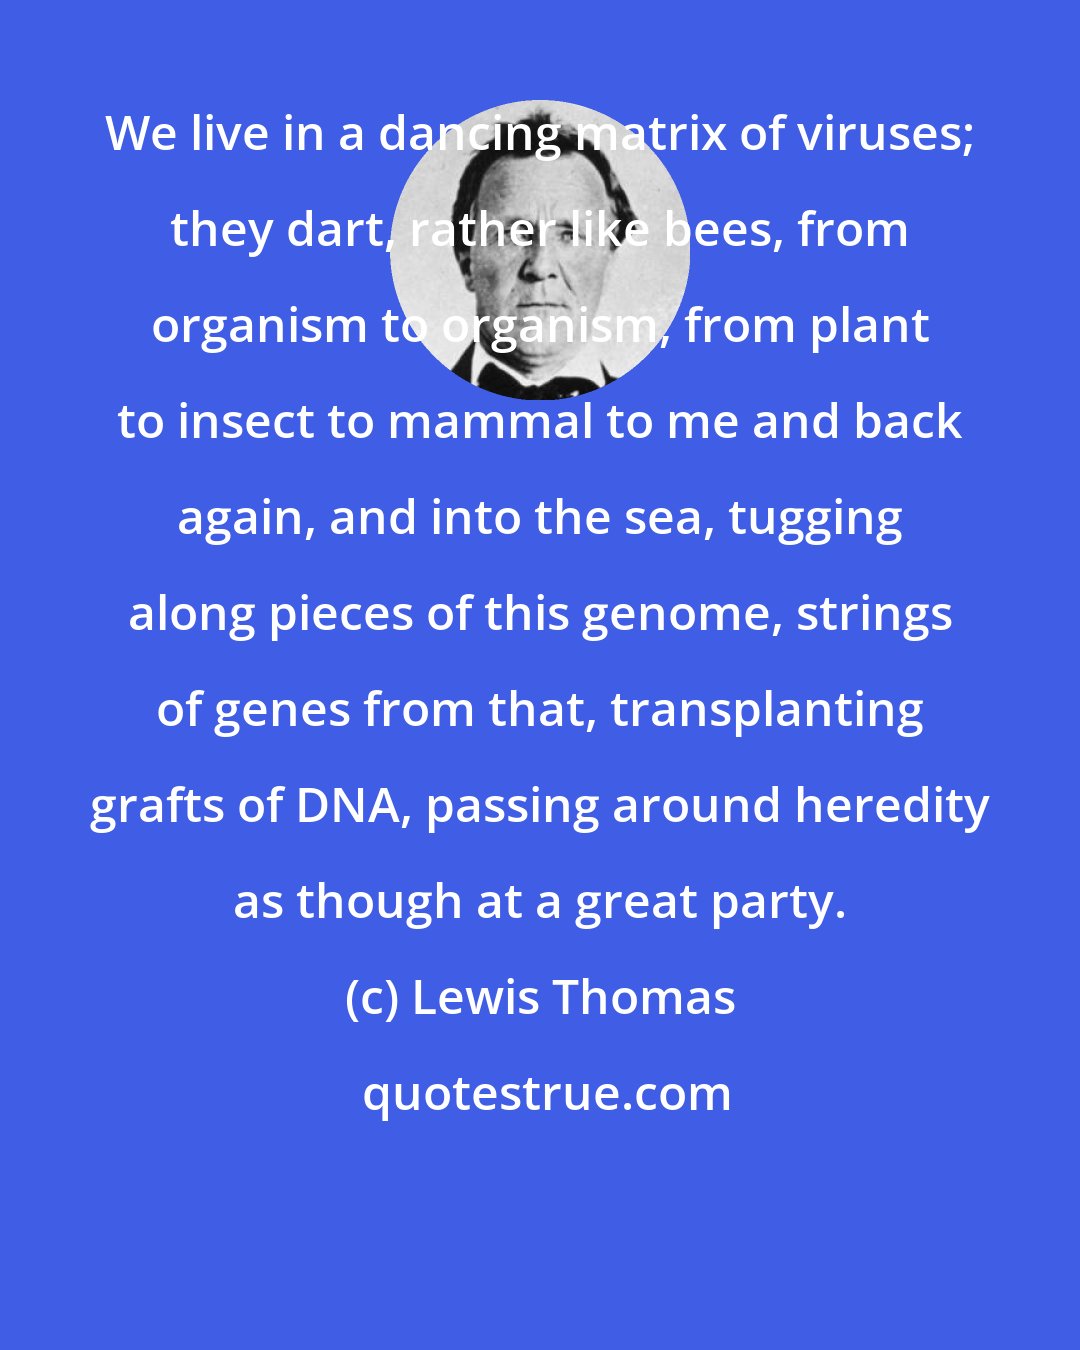 Lewis Thomas: We live in a dancing matrix of viruses; they dart, rather like bees, from organism to organism, from plant to insect to mammal to me and back again, and into the sea, tugging along pieces of this genome, strings of genes from that, transplanting grafts of DNA, passing around heredity as though at a great party.